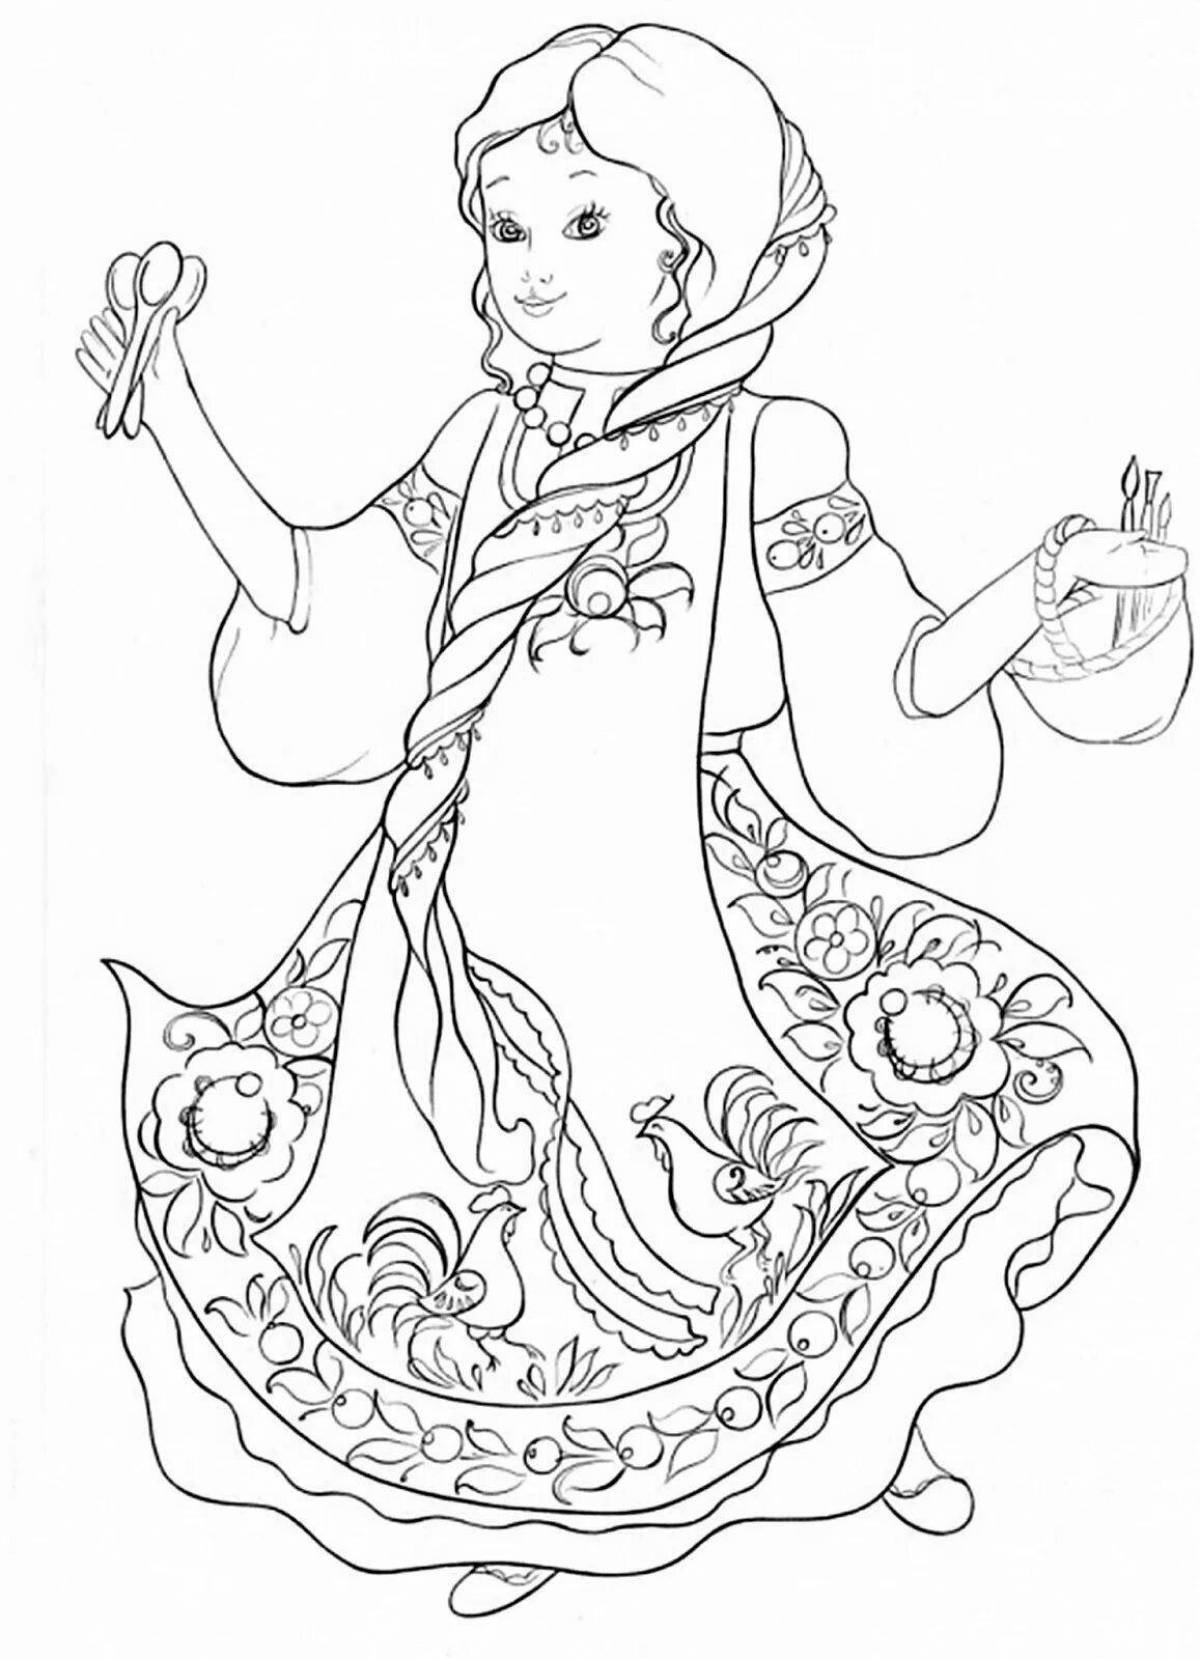 Incredible Jumping Fire Coloring Page